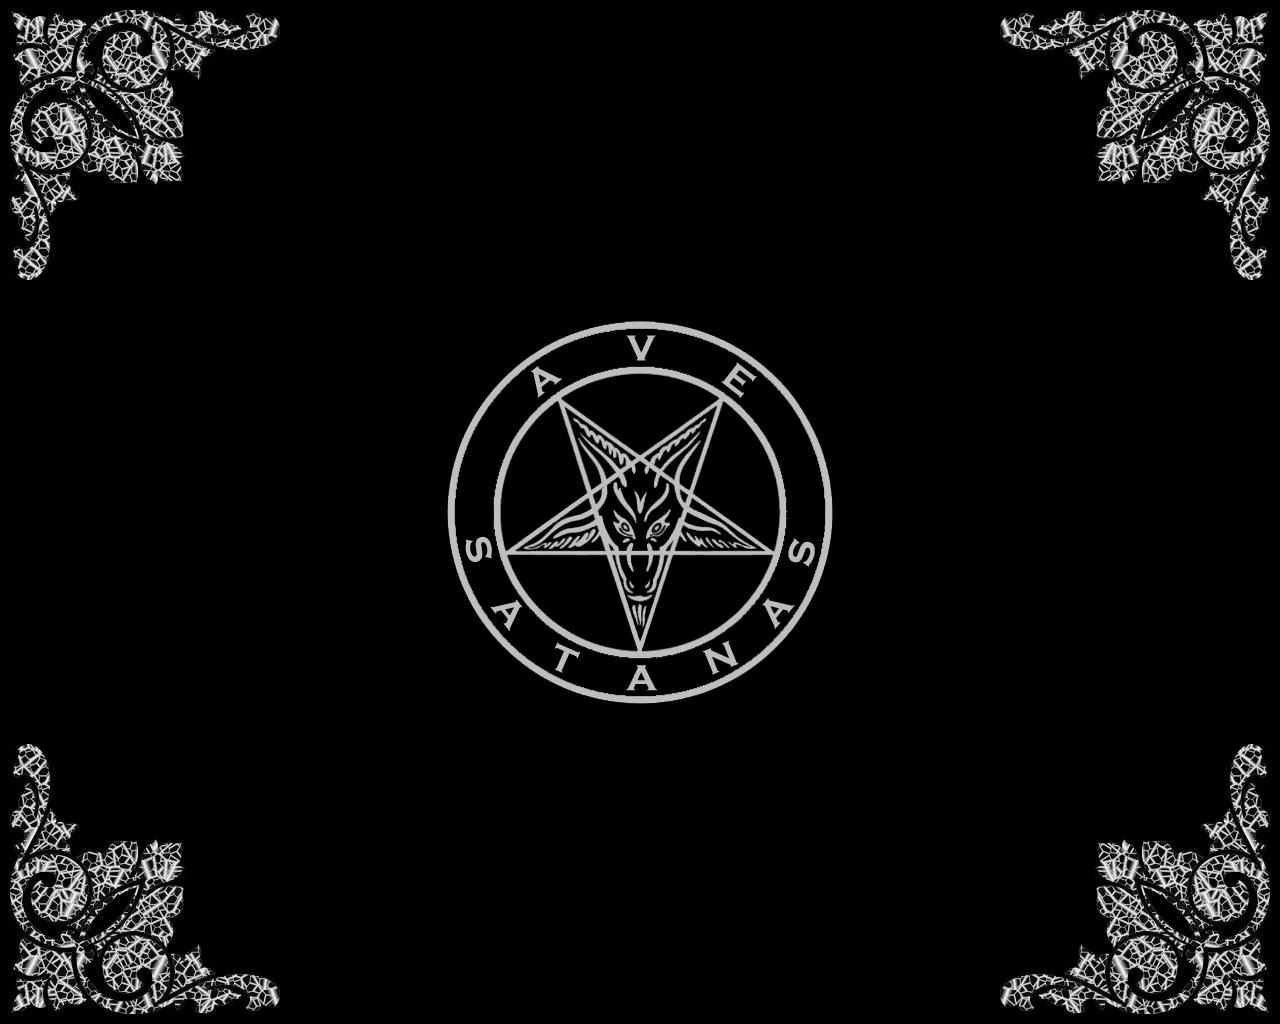 Pin Satanism Wallpaper Background For Desktops Pictures Picture On